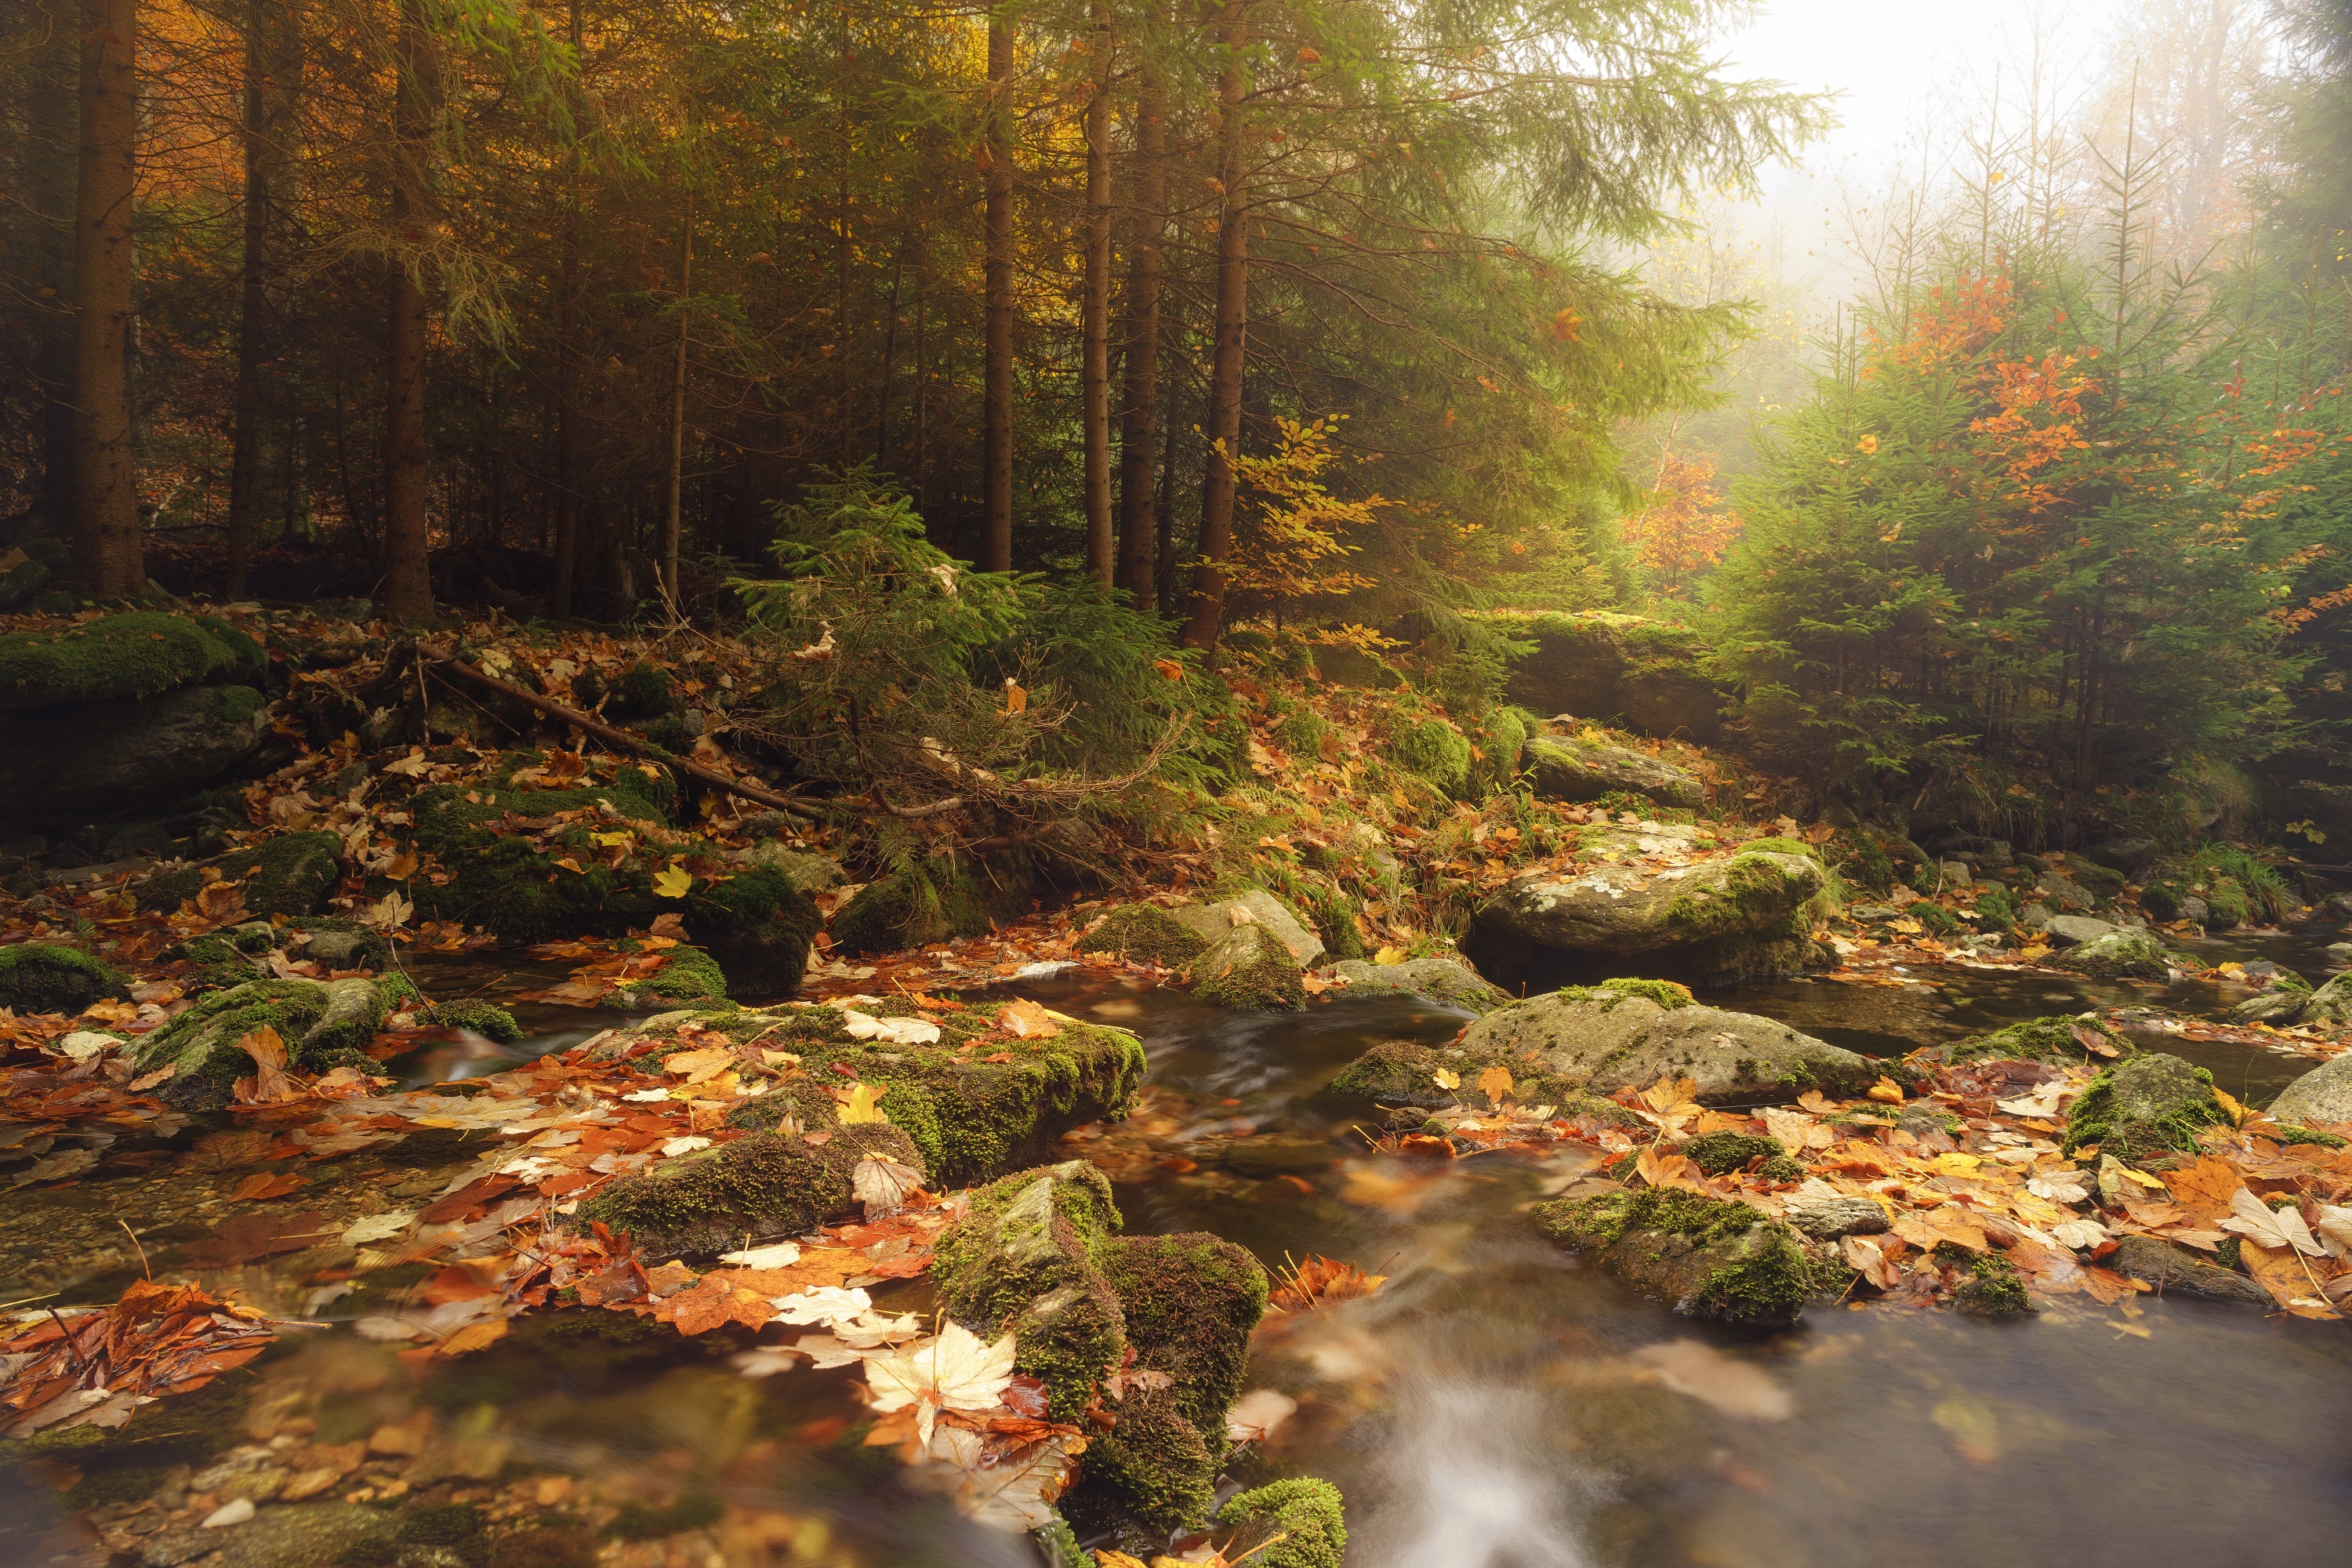 General 3000x2000 fall trees outdoors nature creeks plants leaves fallen leaves